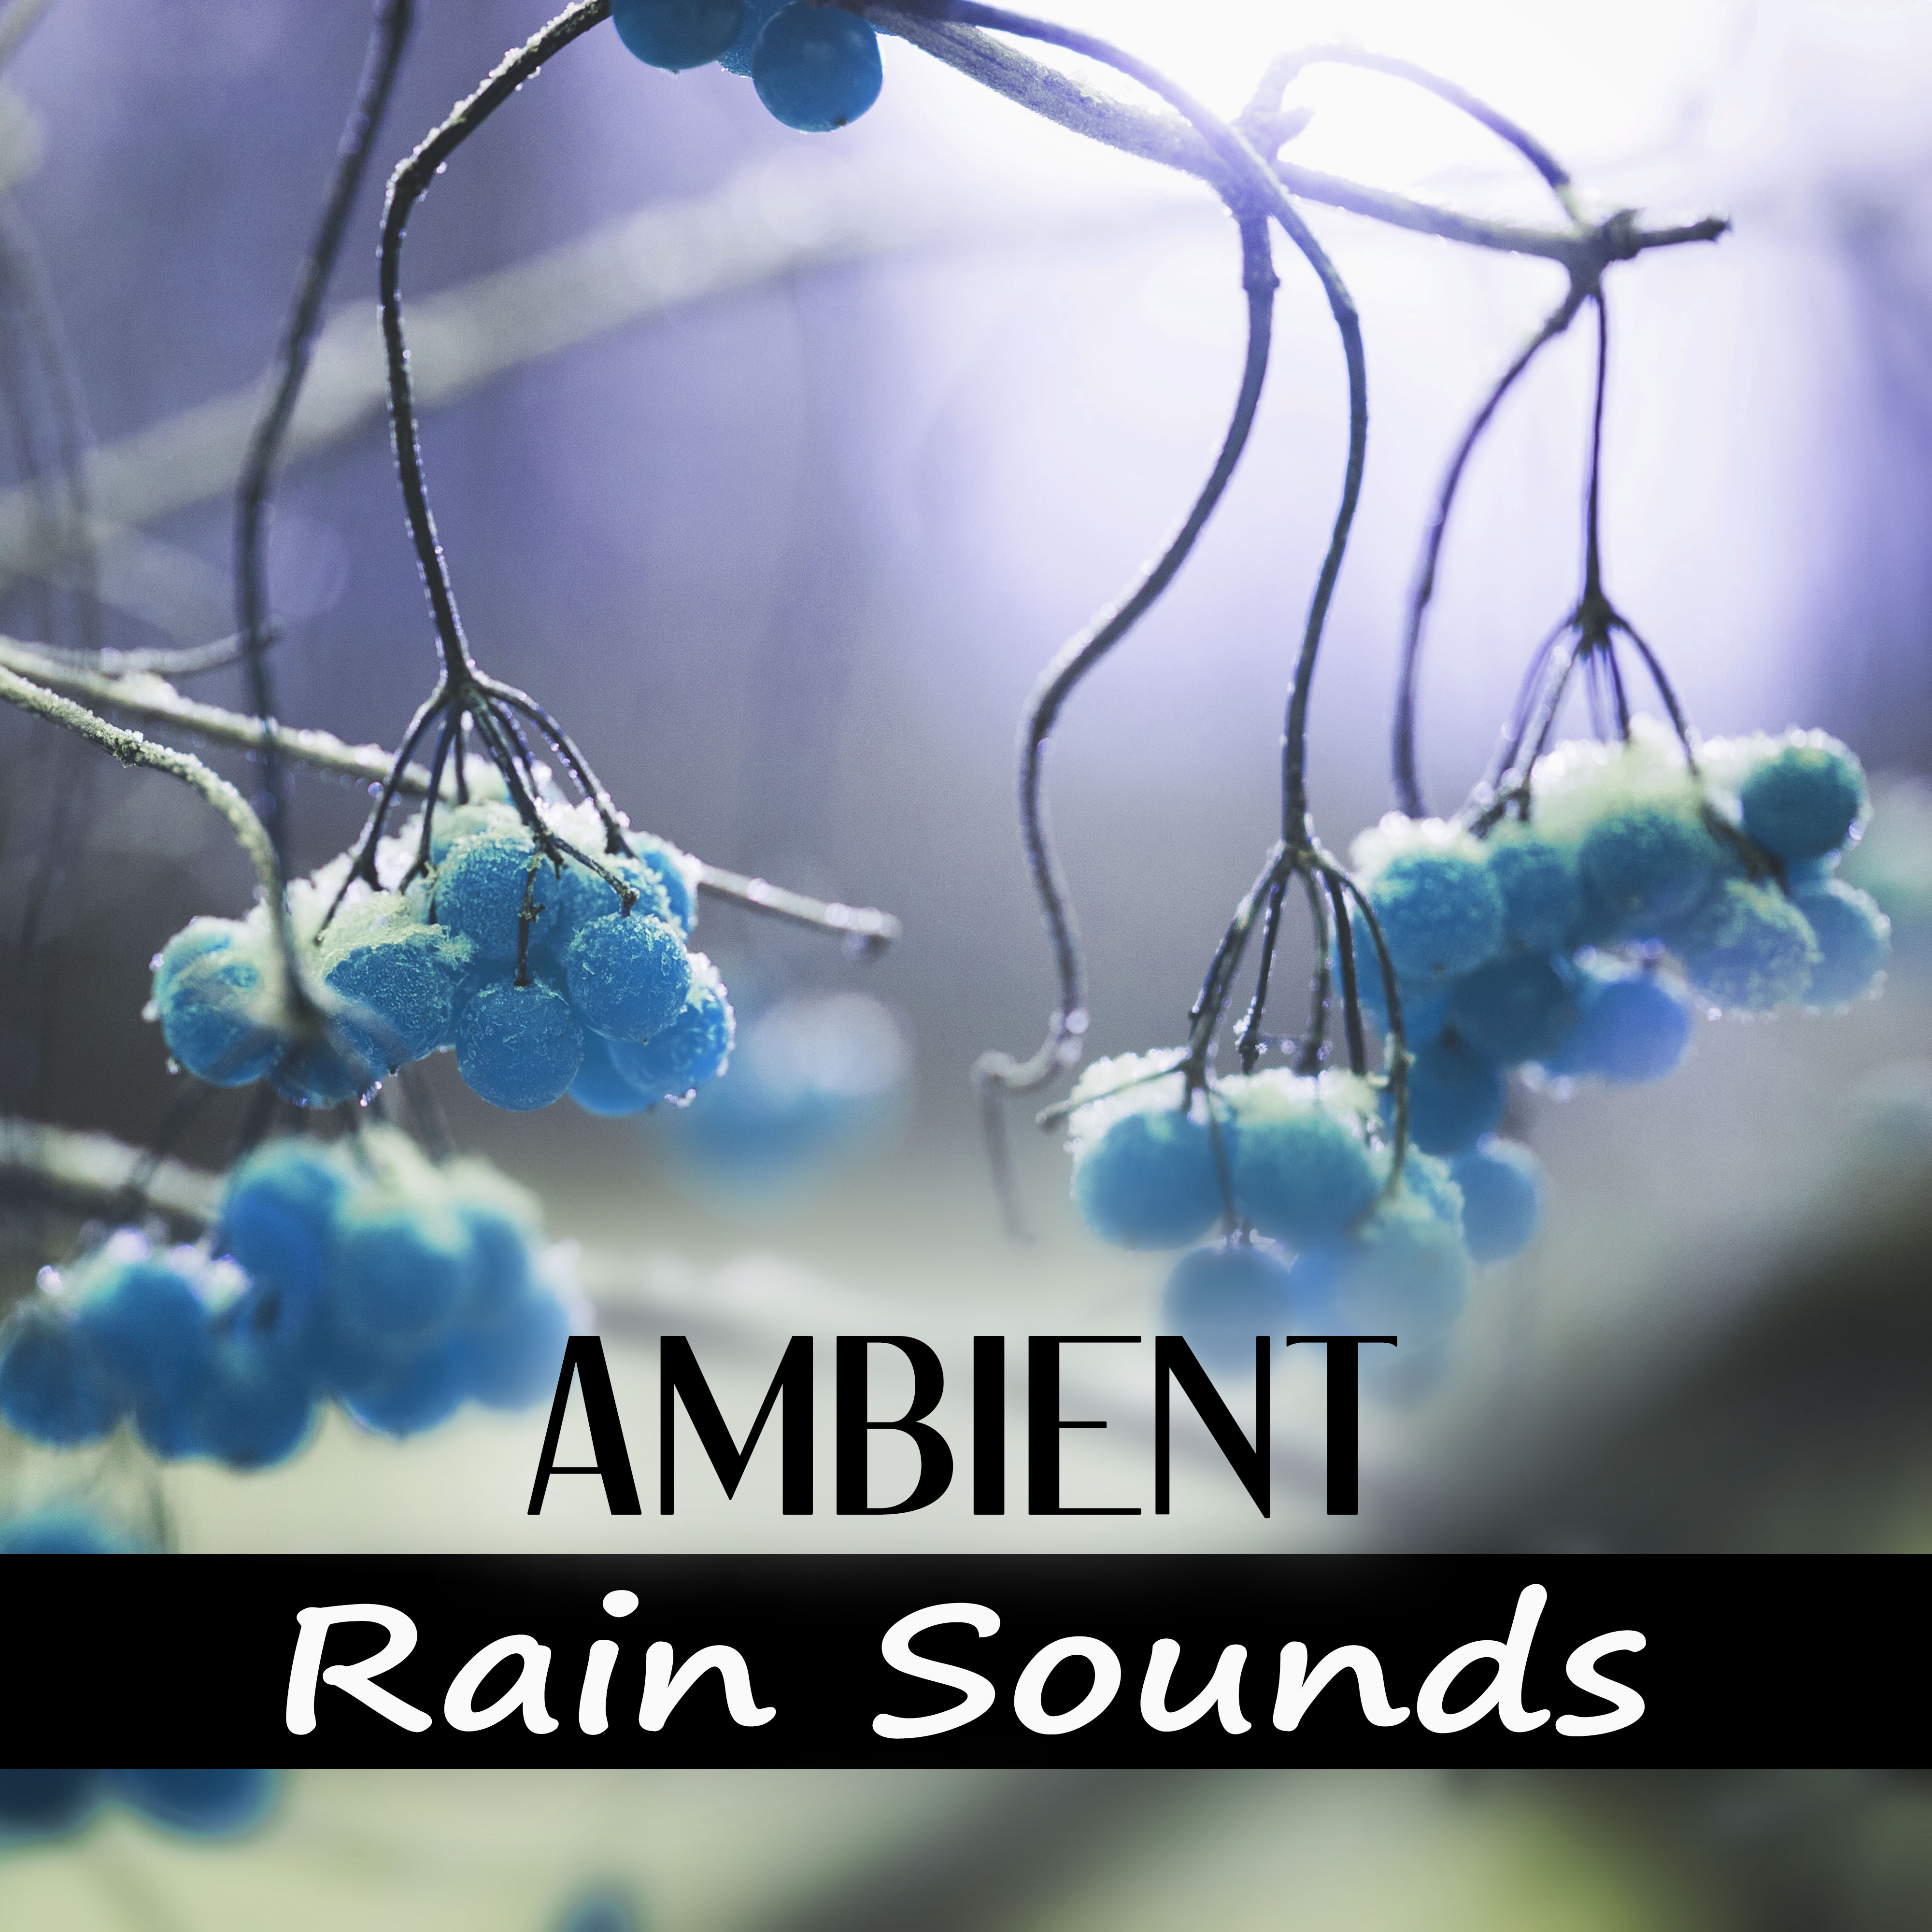 Ambiant Rain Sounds - Sound of Rainfall, Calm Music, Relax, Water, Serenity Music, Reduce Anxiety, Massage